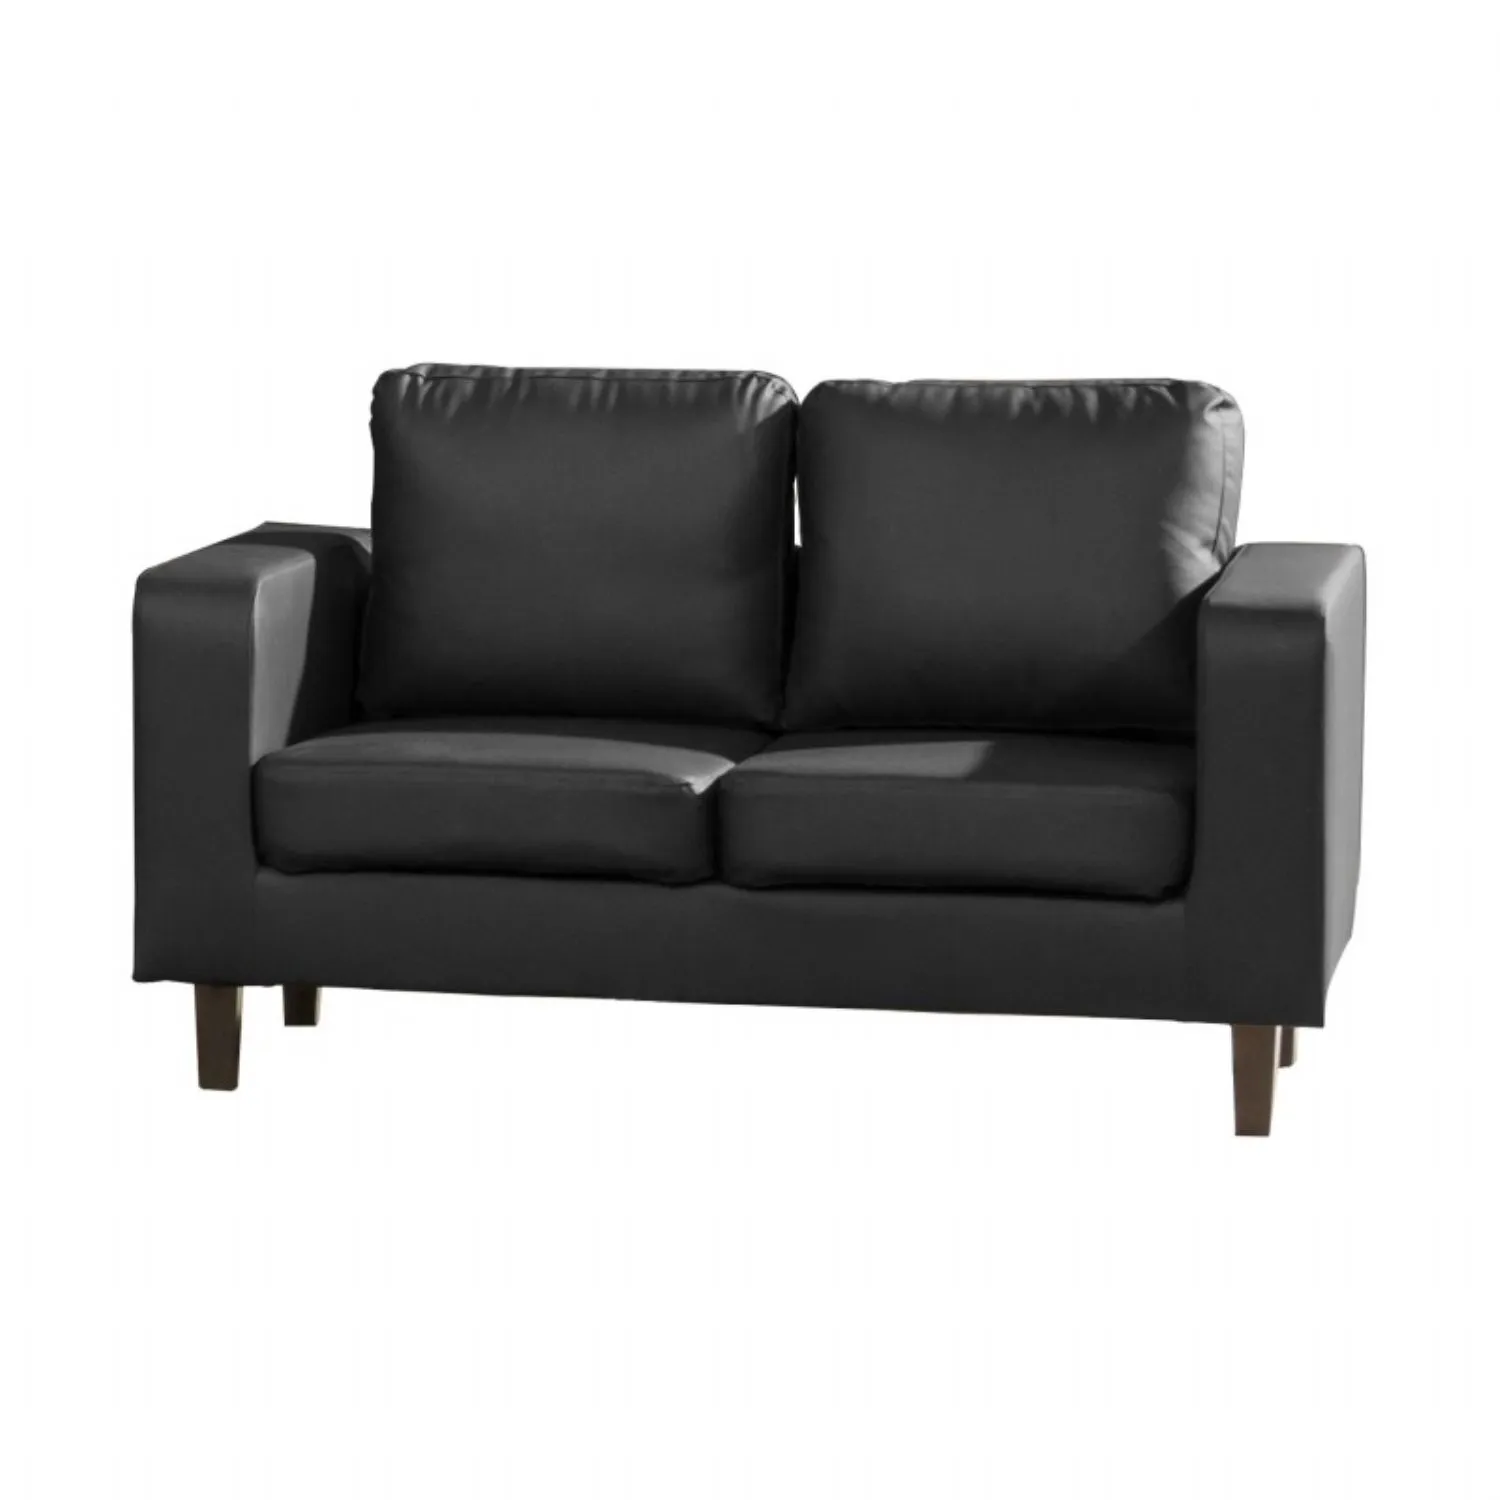 Contract Faux Leather 2 Seat Sofa